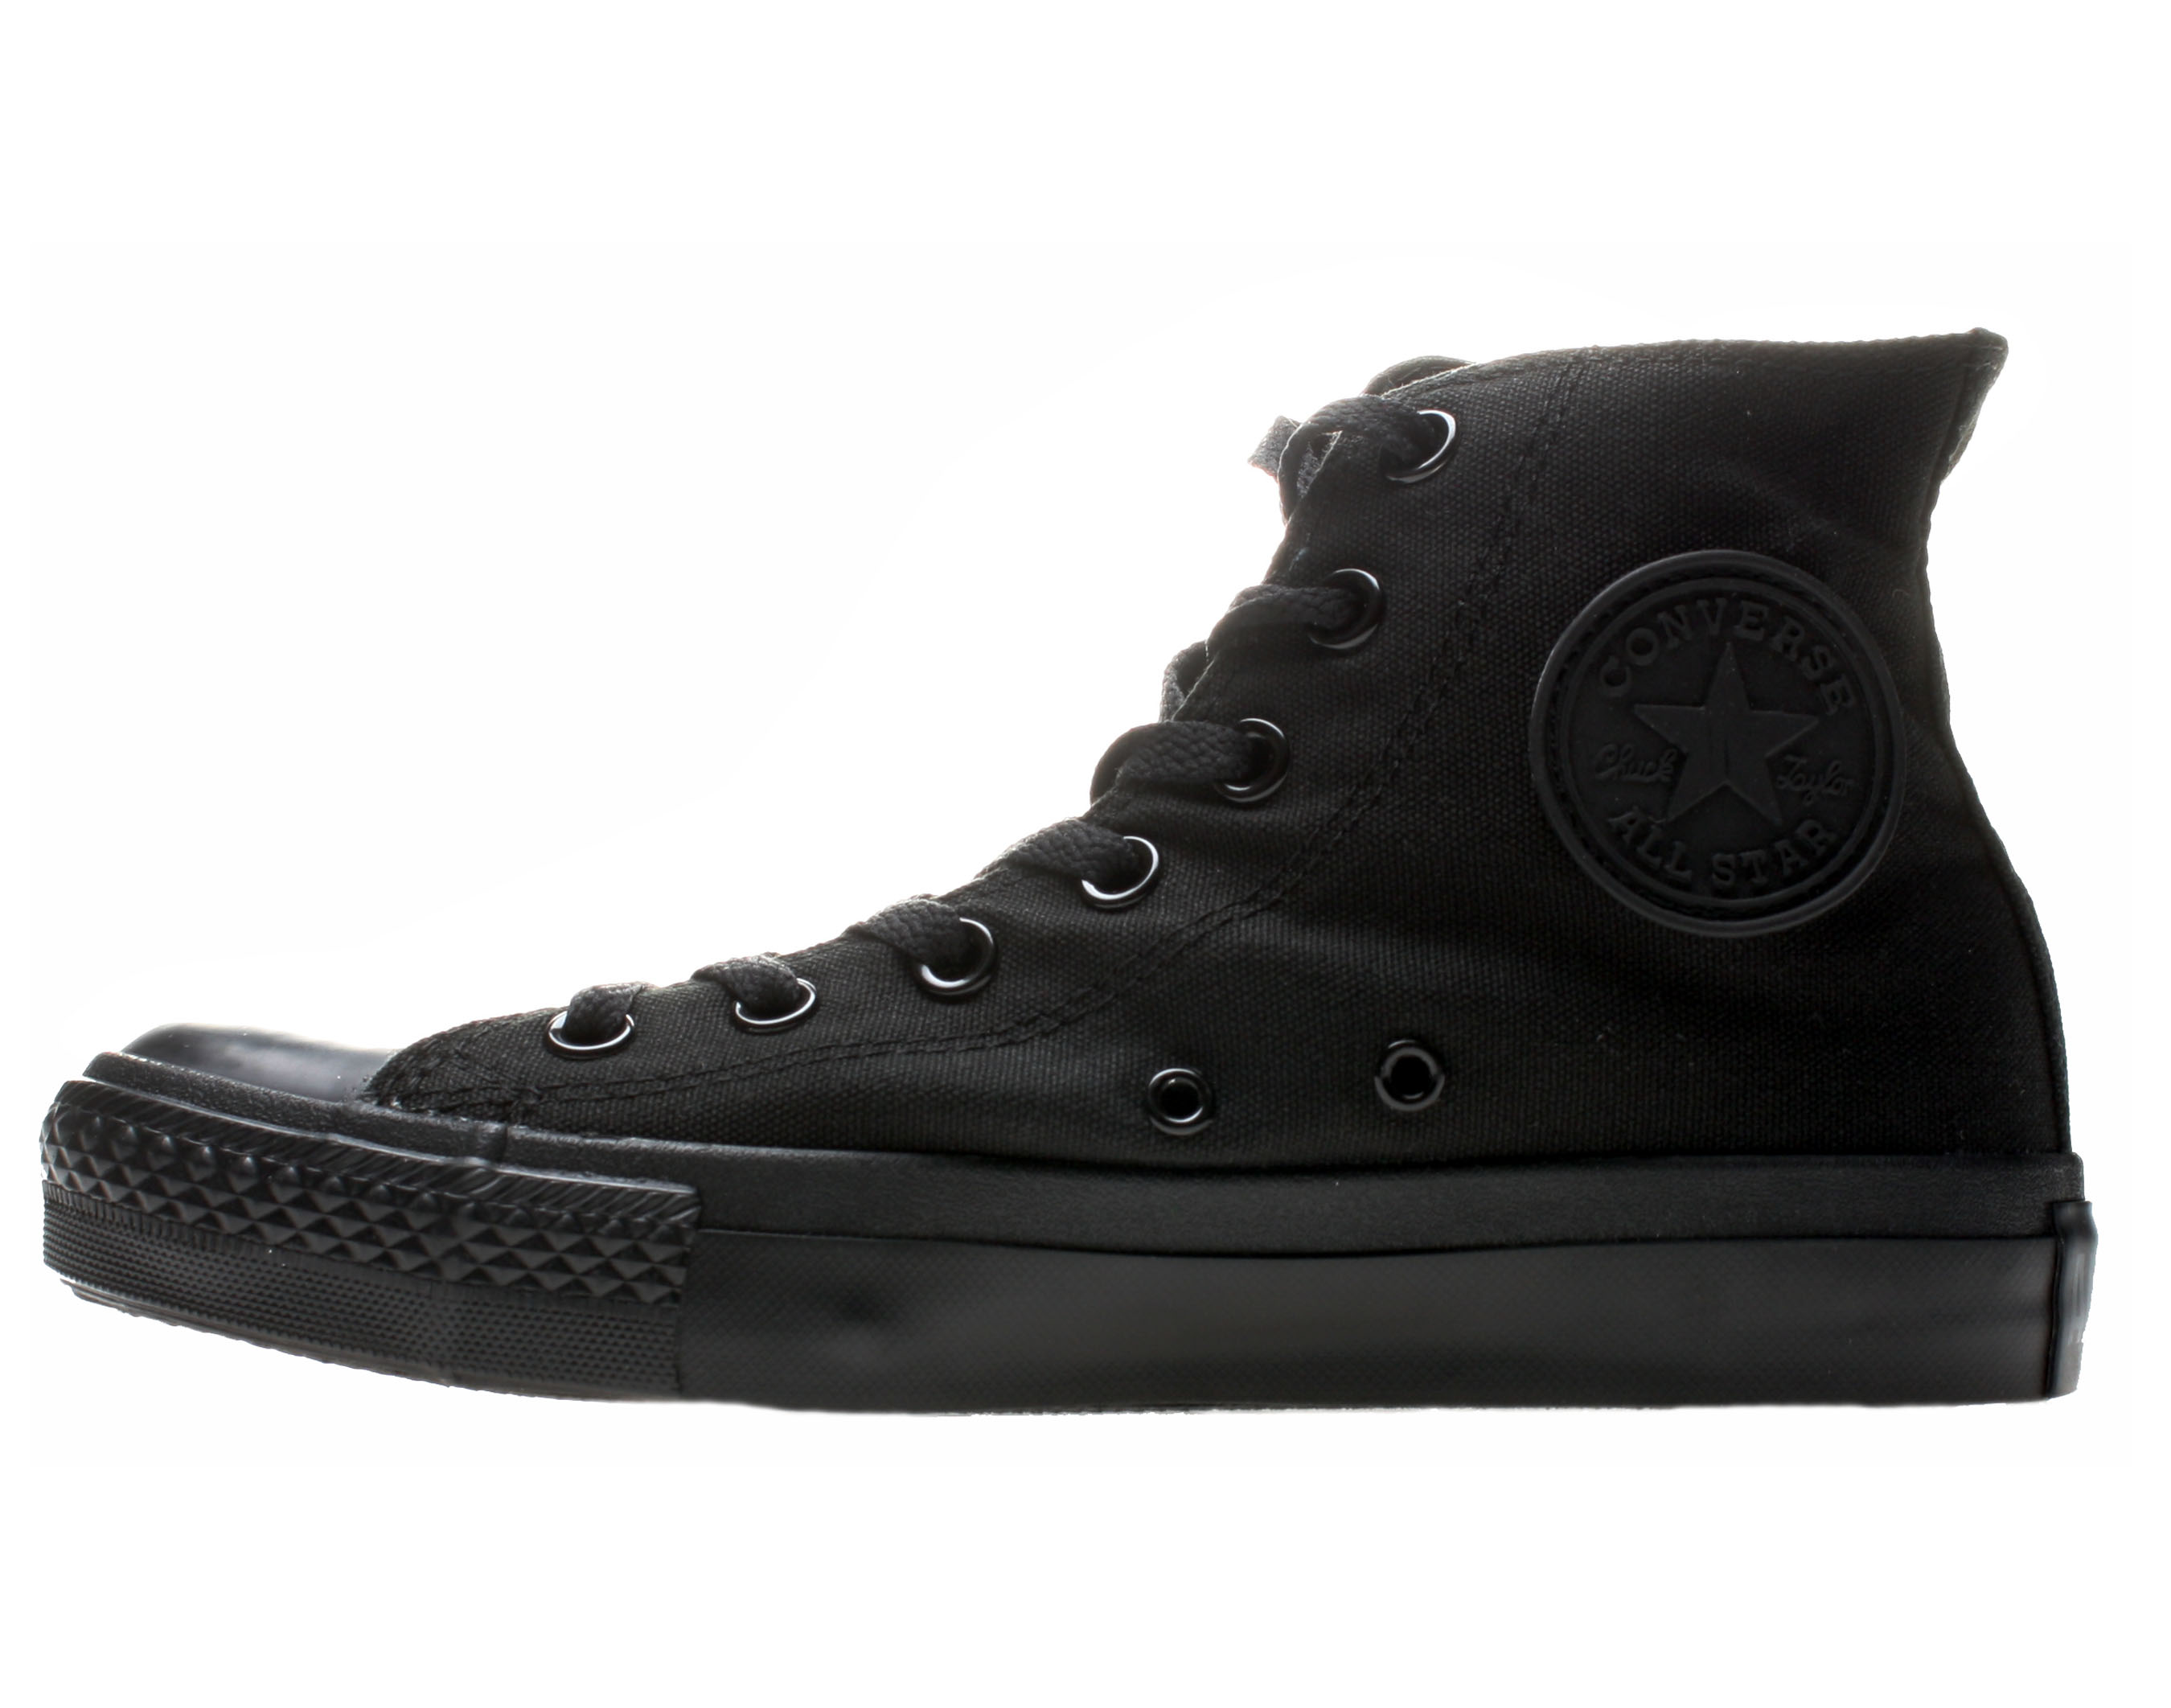 Converse Chuck Taylor All Star Canvas High Top Sneaker - image 3 of 6